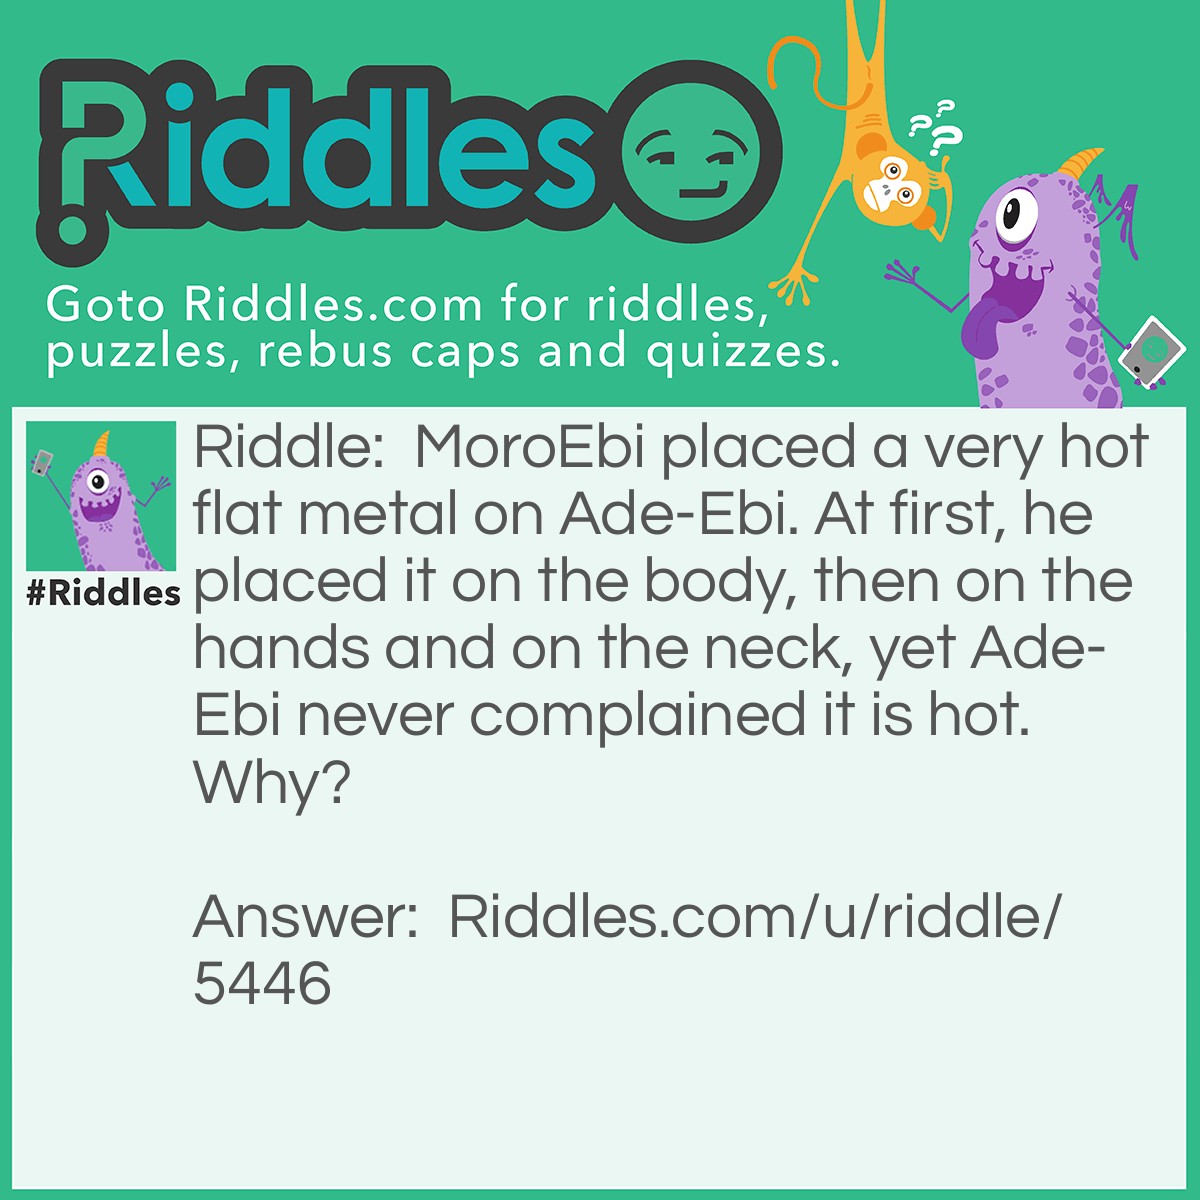 Riddle: MoroEbi placed a very hot flat metal on Ade-Ebi. At first, he placed it on the body, then on the hands and on the neck, yet Ade-Ebi never complained it is hot. Why? Answer: Ade-Ebi is a shirt MoroEbi is pressing.